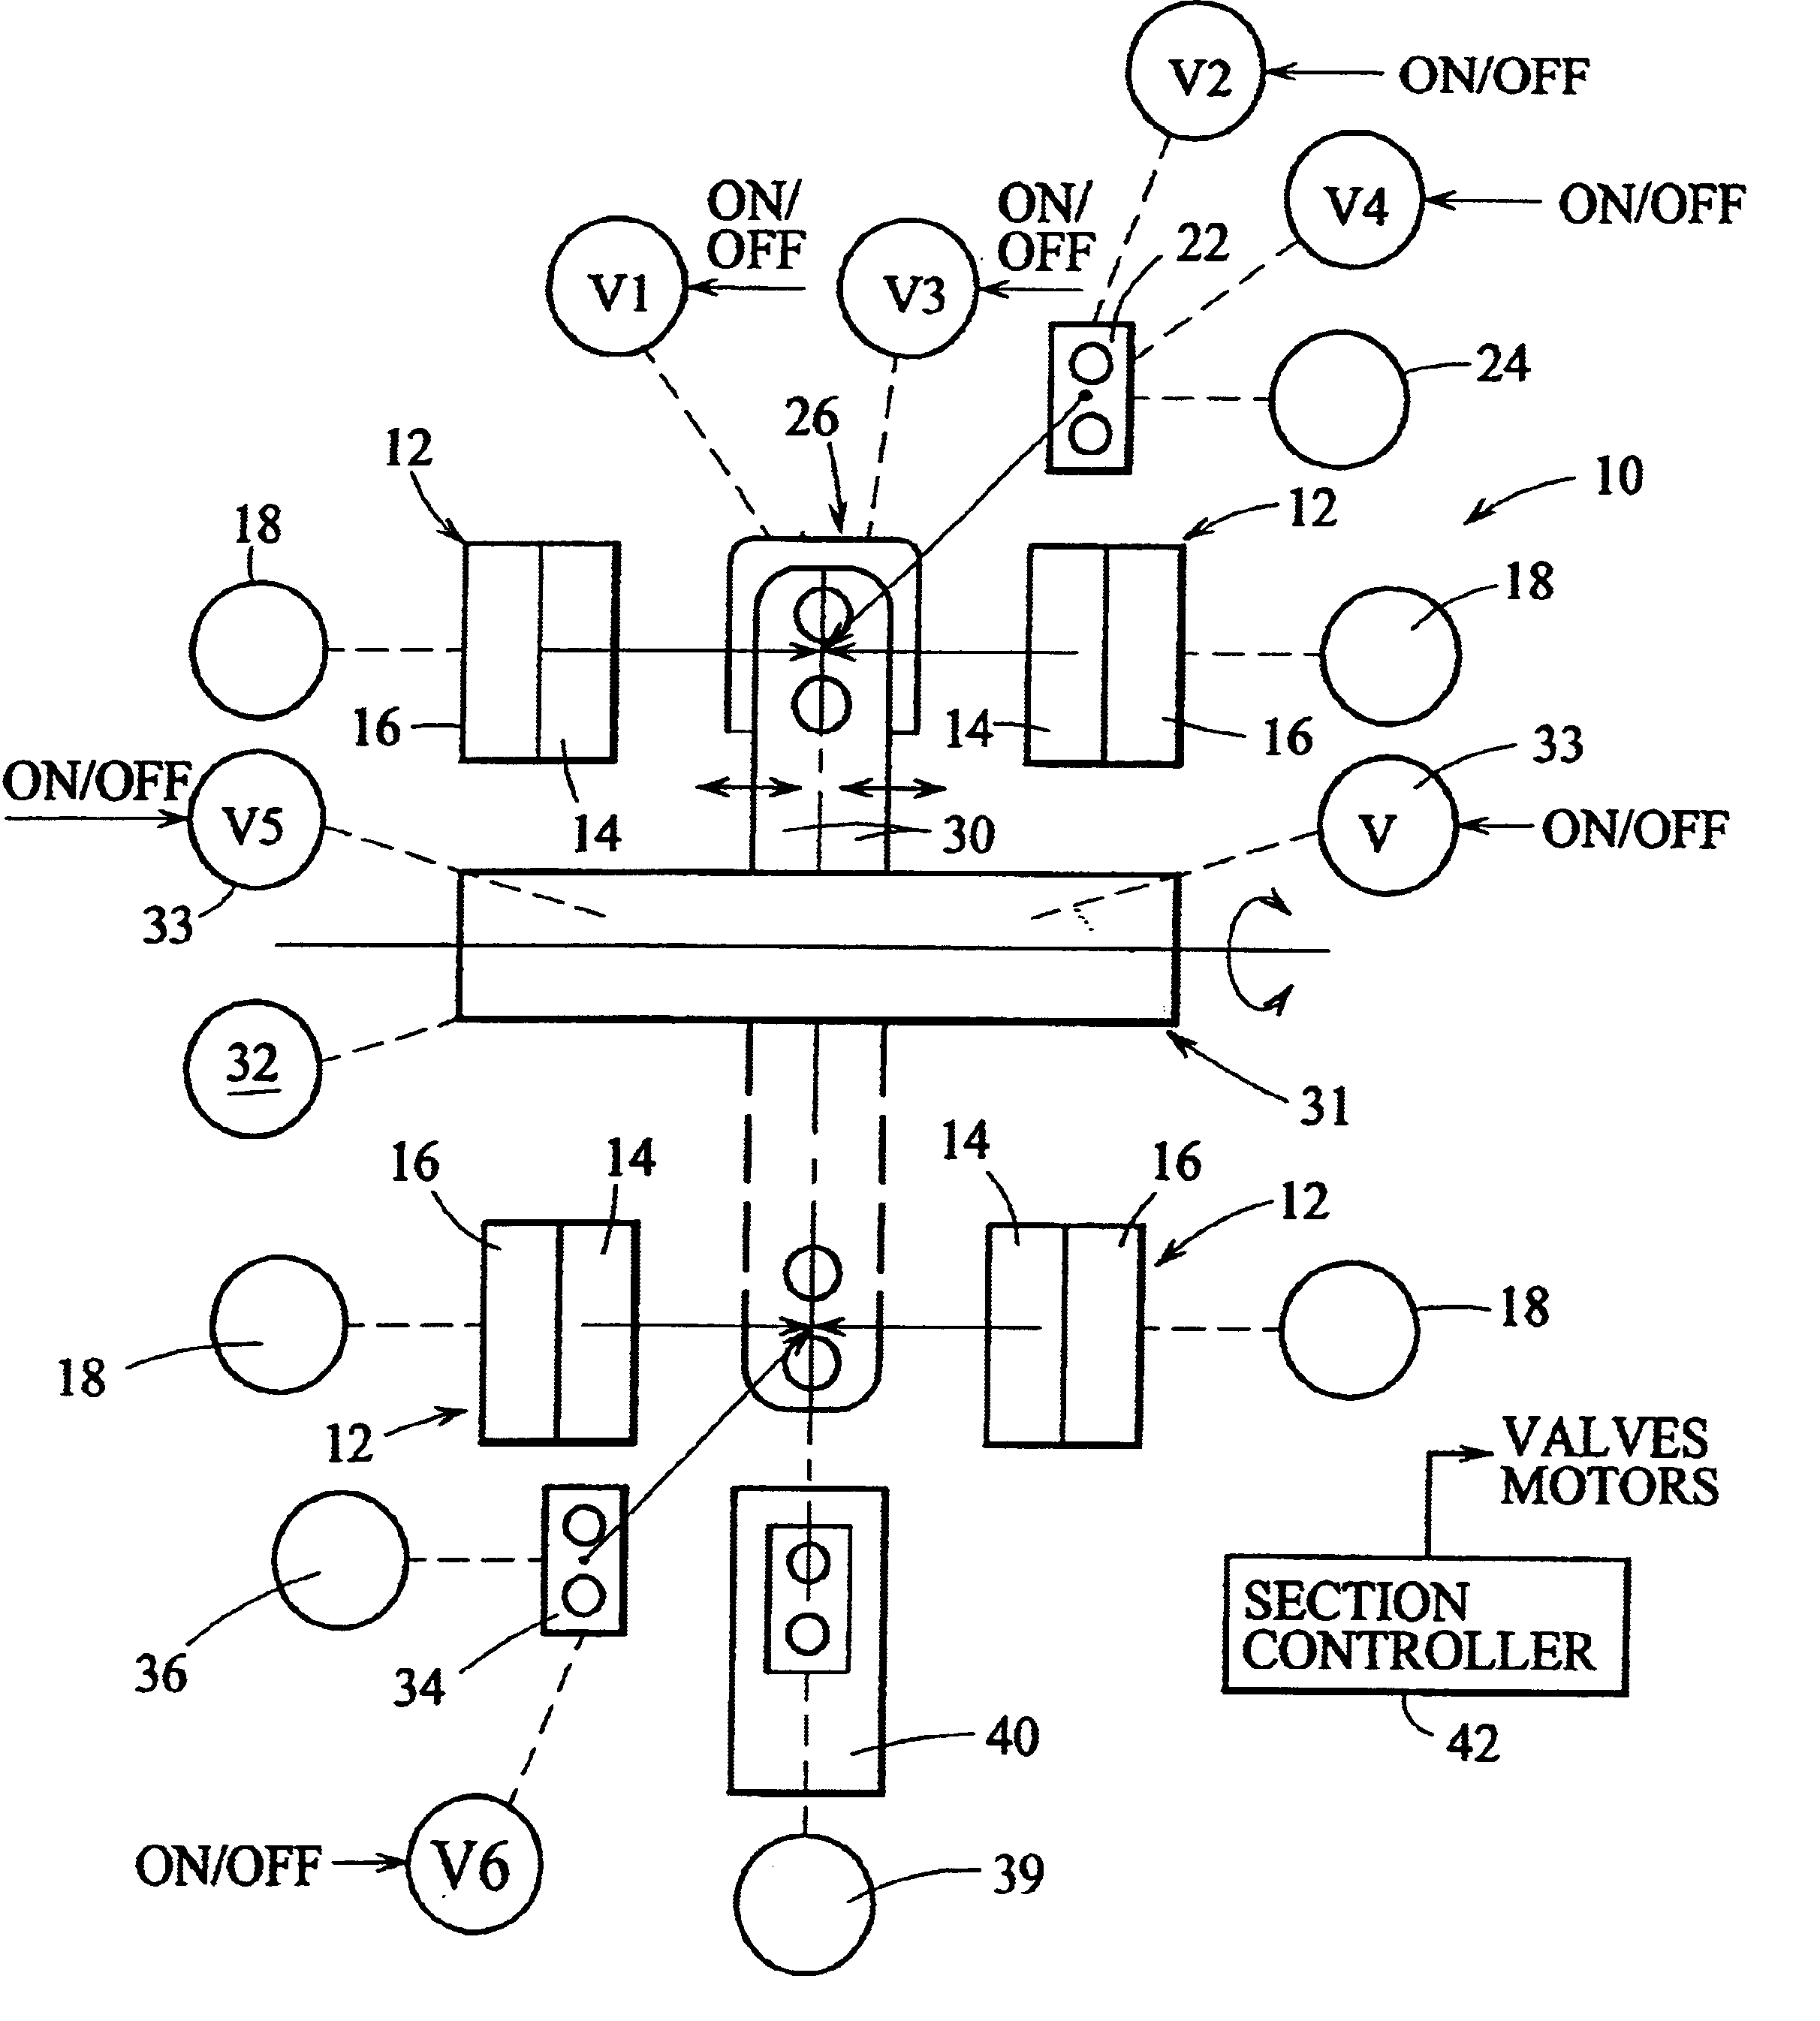 Control for an I. S. machine